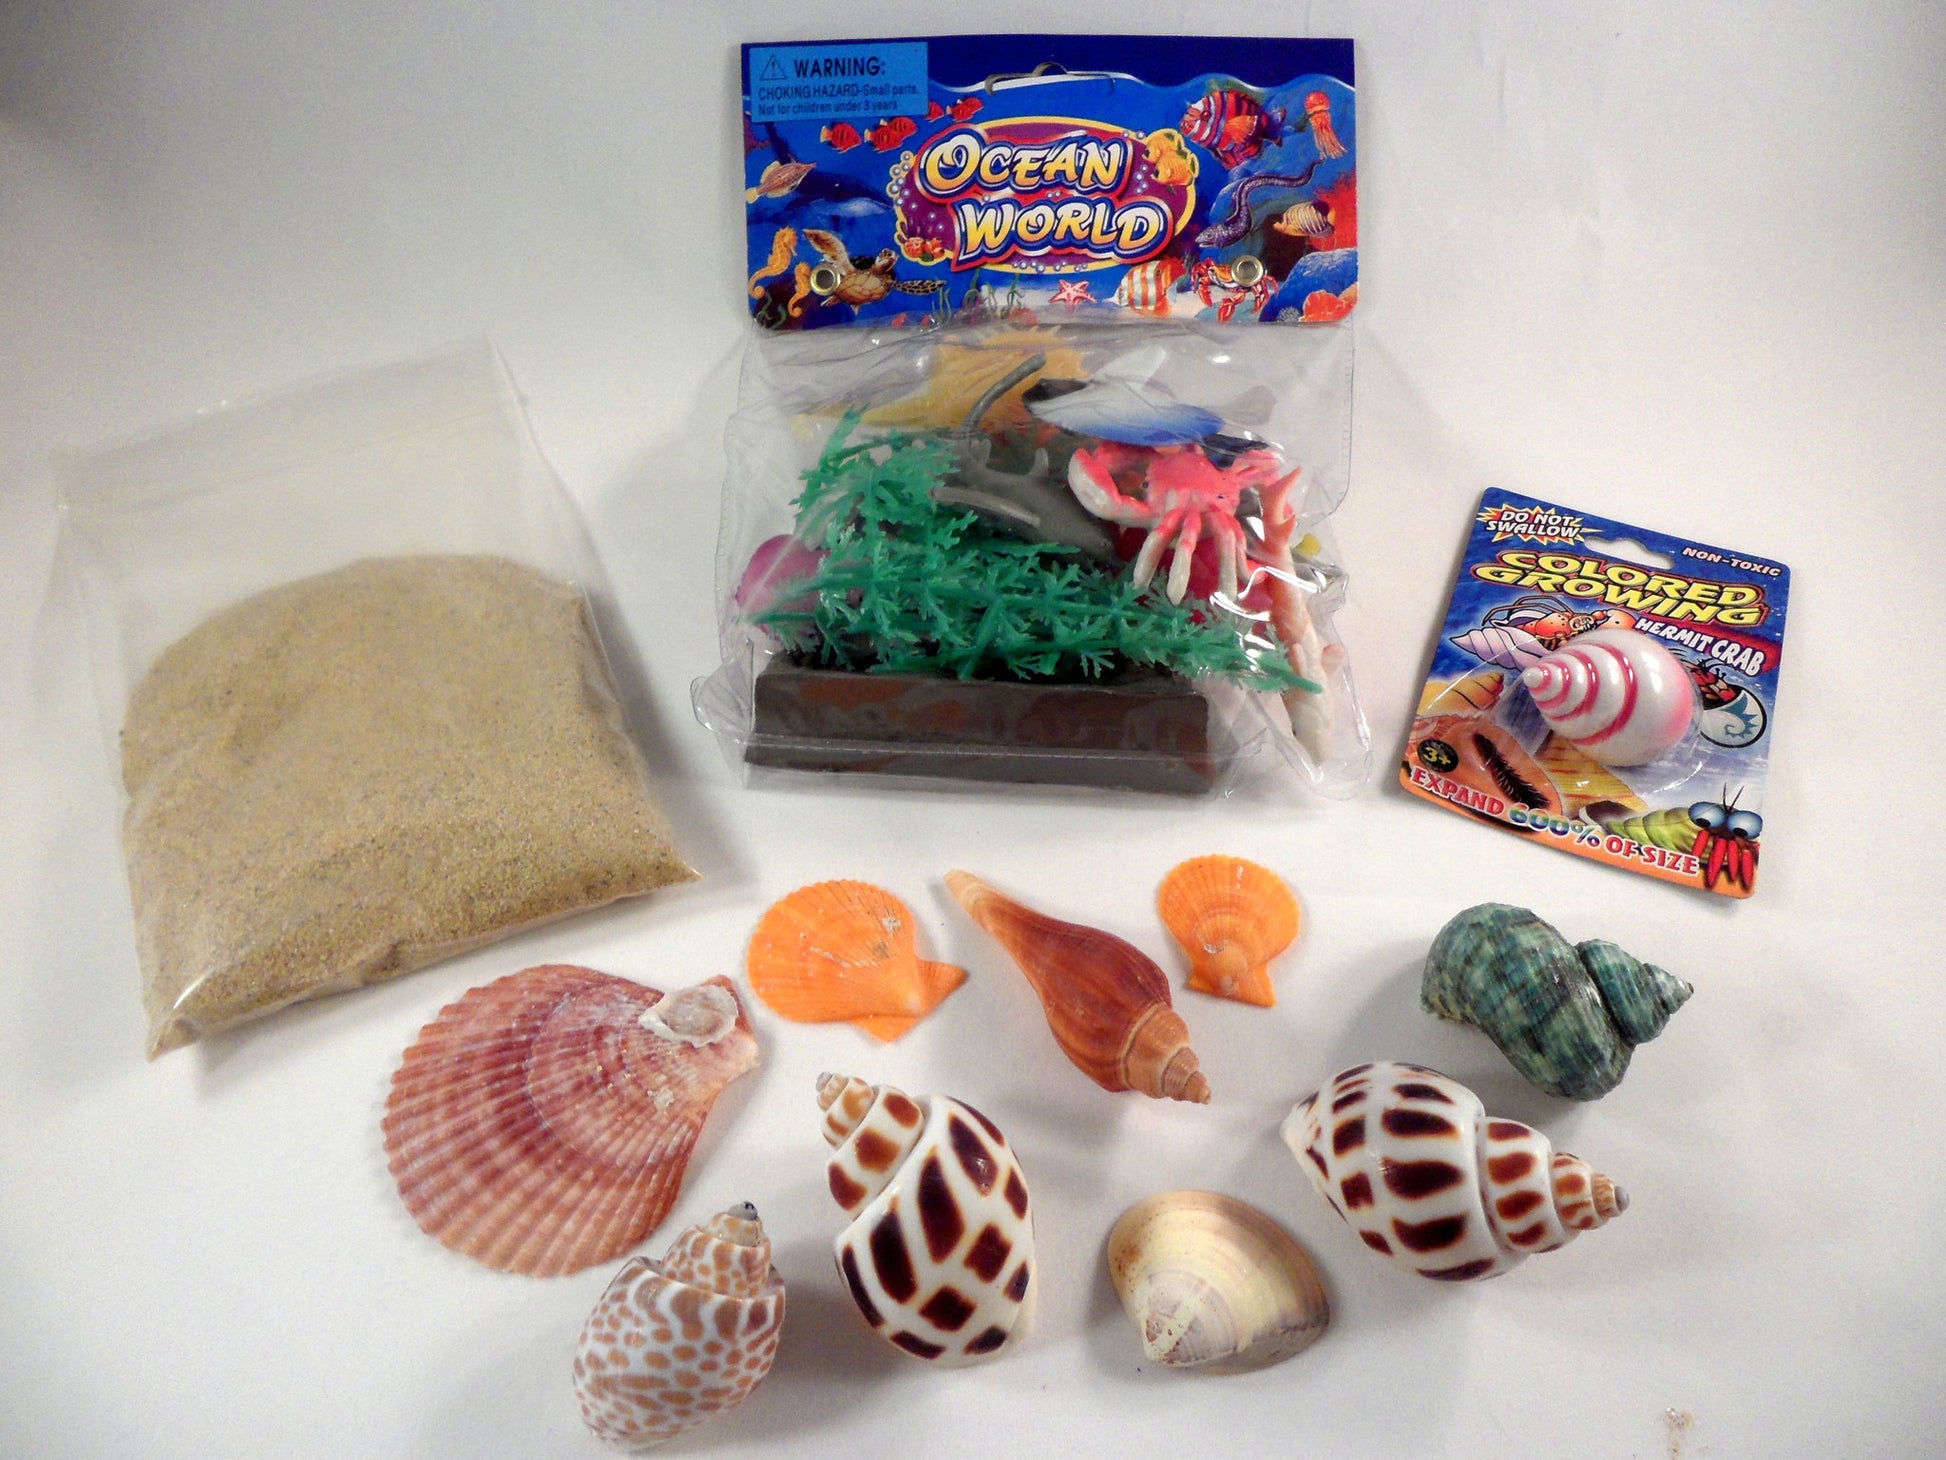 Design a hermit crab habitat - A House for Hermit Crab - Ivy Kids subscription box activities.